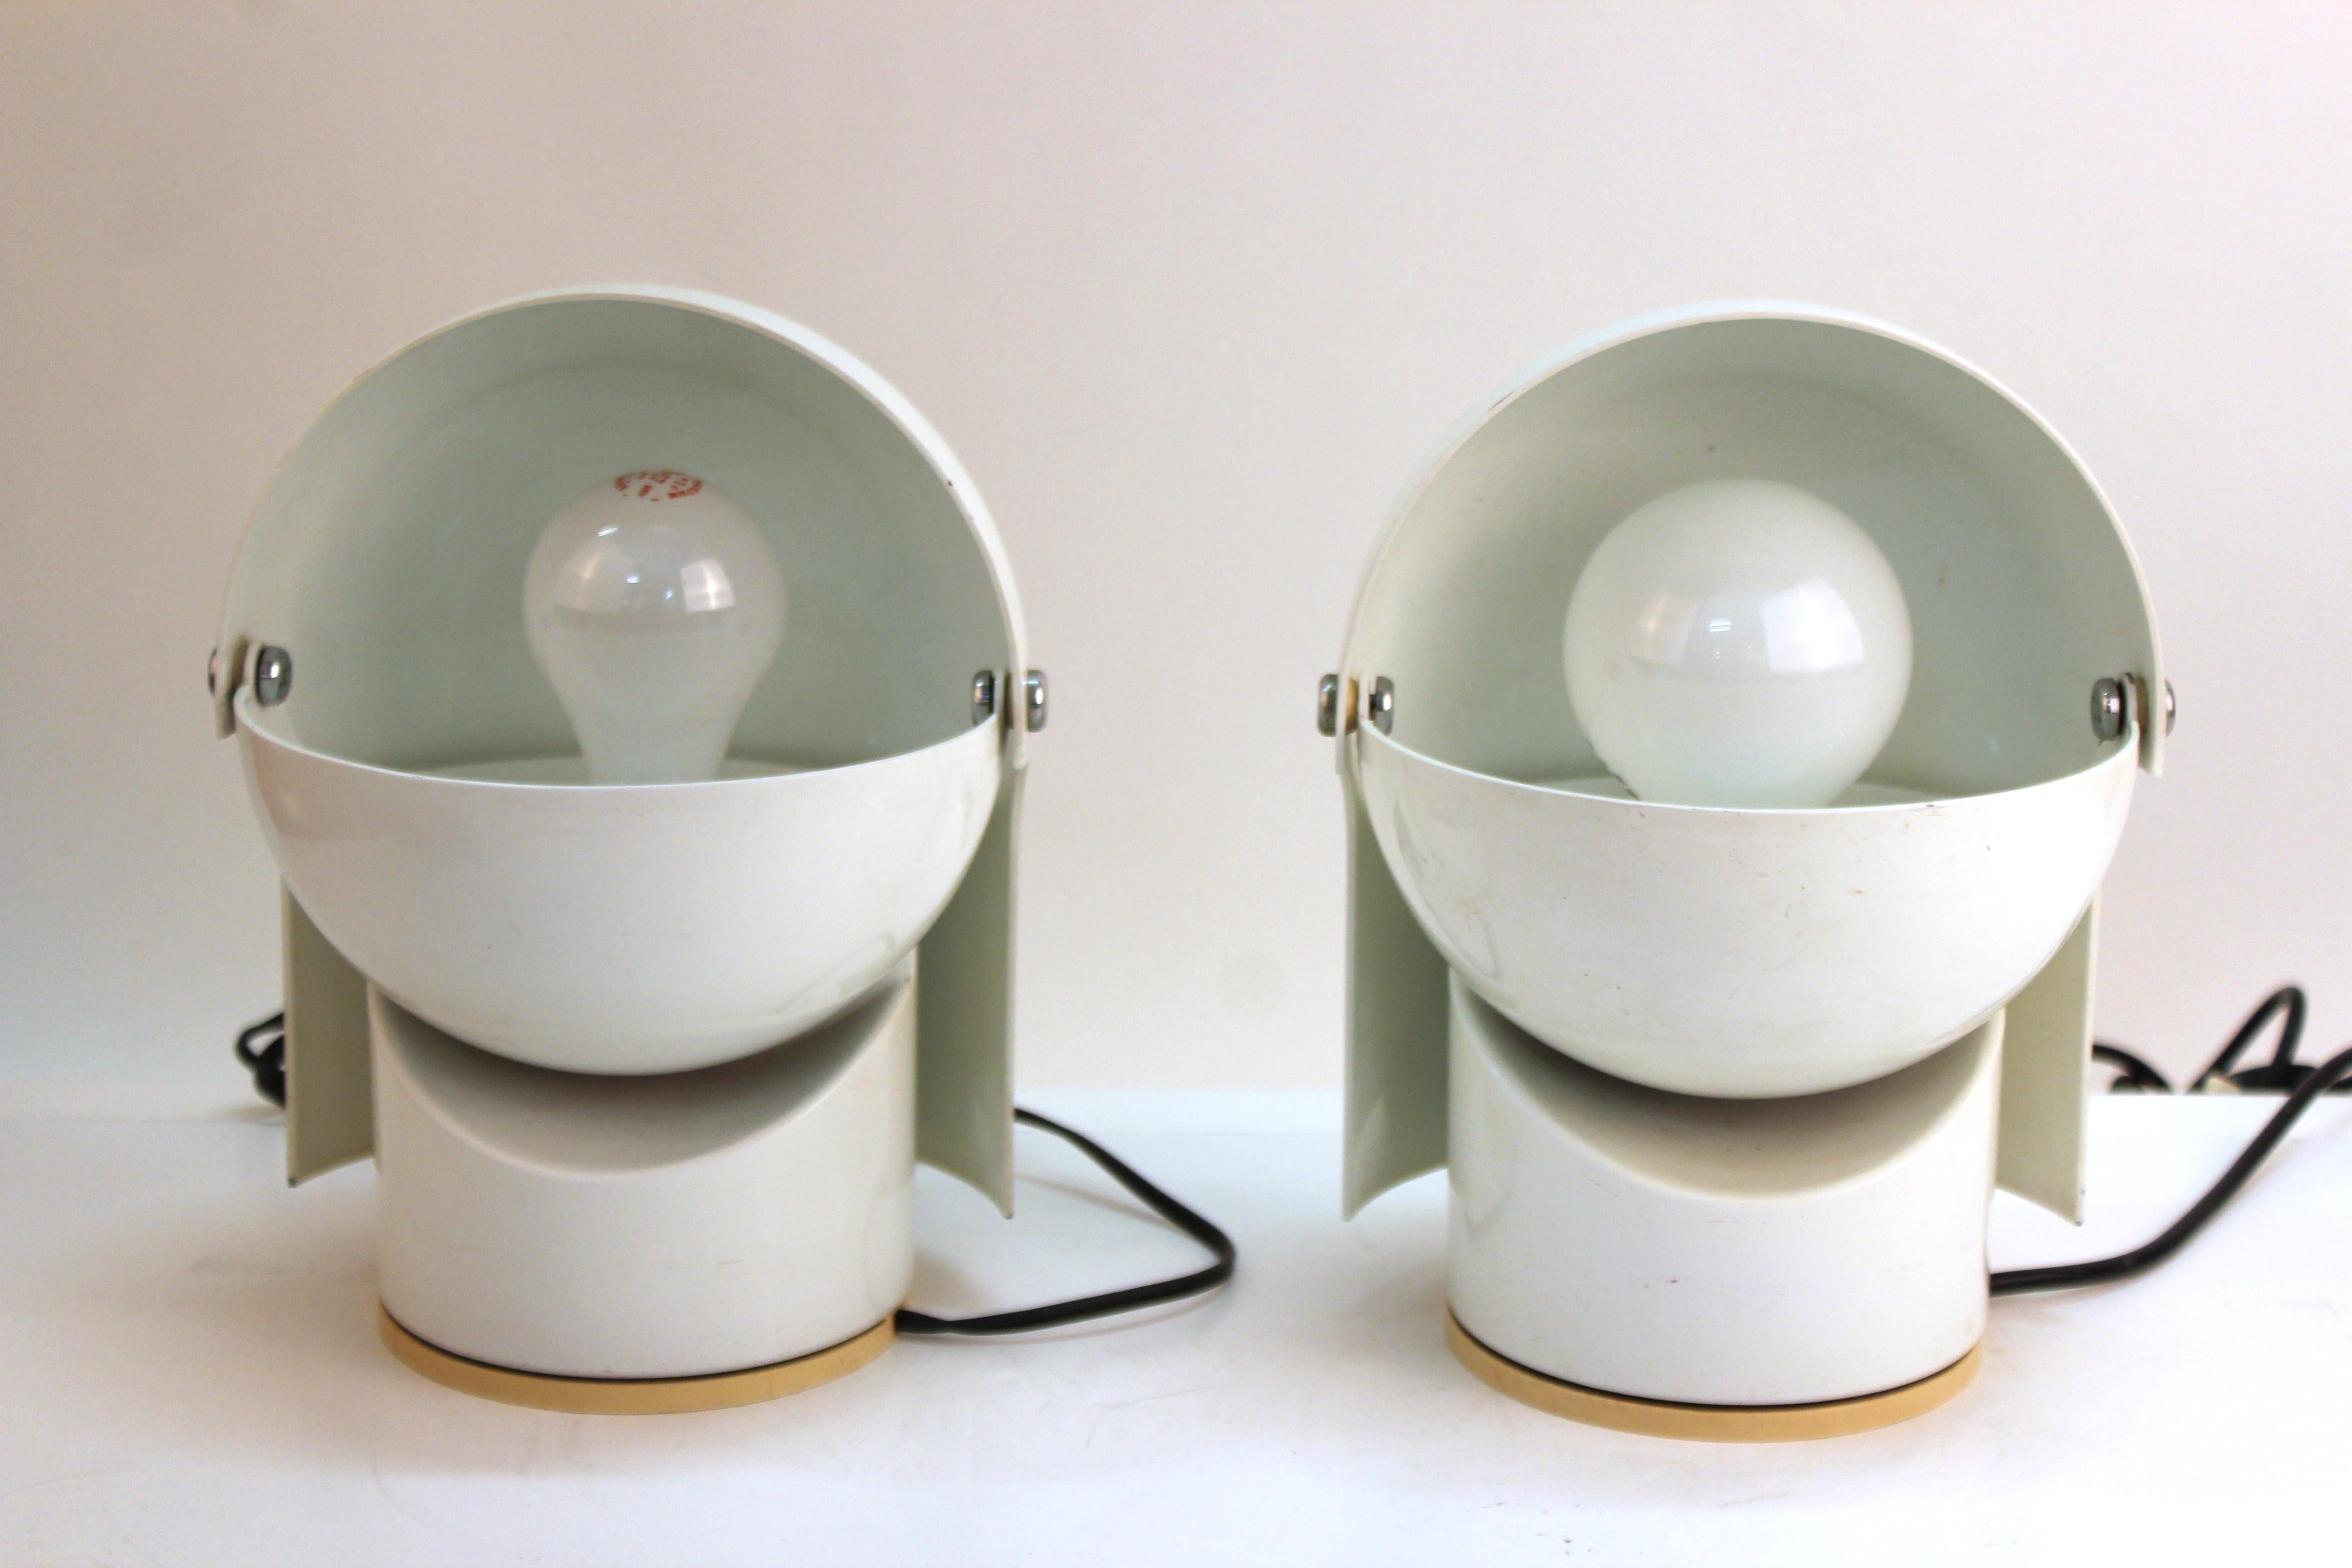 Italian Mid-Century Modern pair of 'Pileino' table lights designed in the 1970s by Gae Aulenti for Artemide. The pair is made of enameled metal and has a pivoting top part that can direct the light and creates a visually enticing light sculpture.